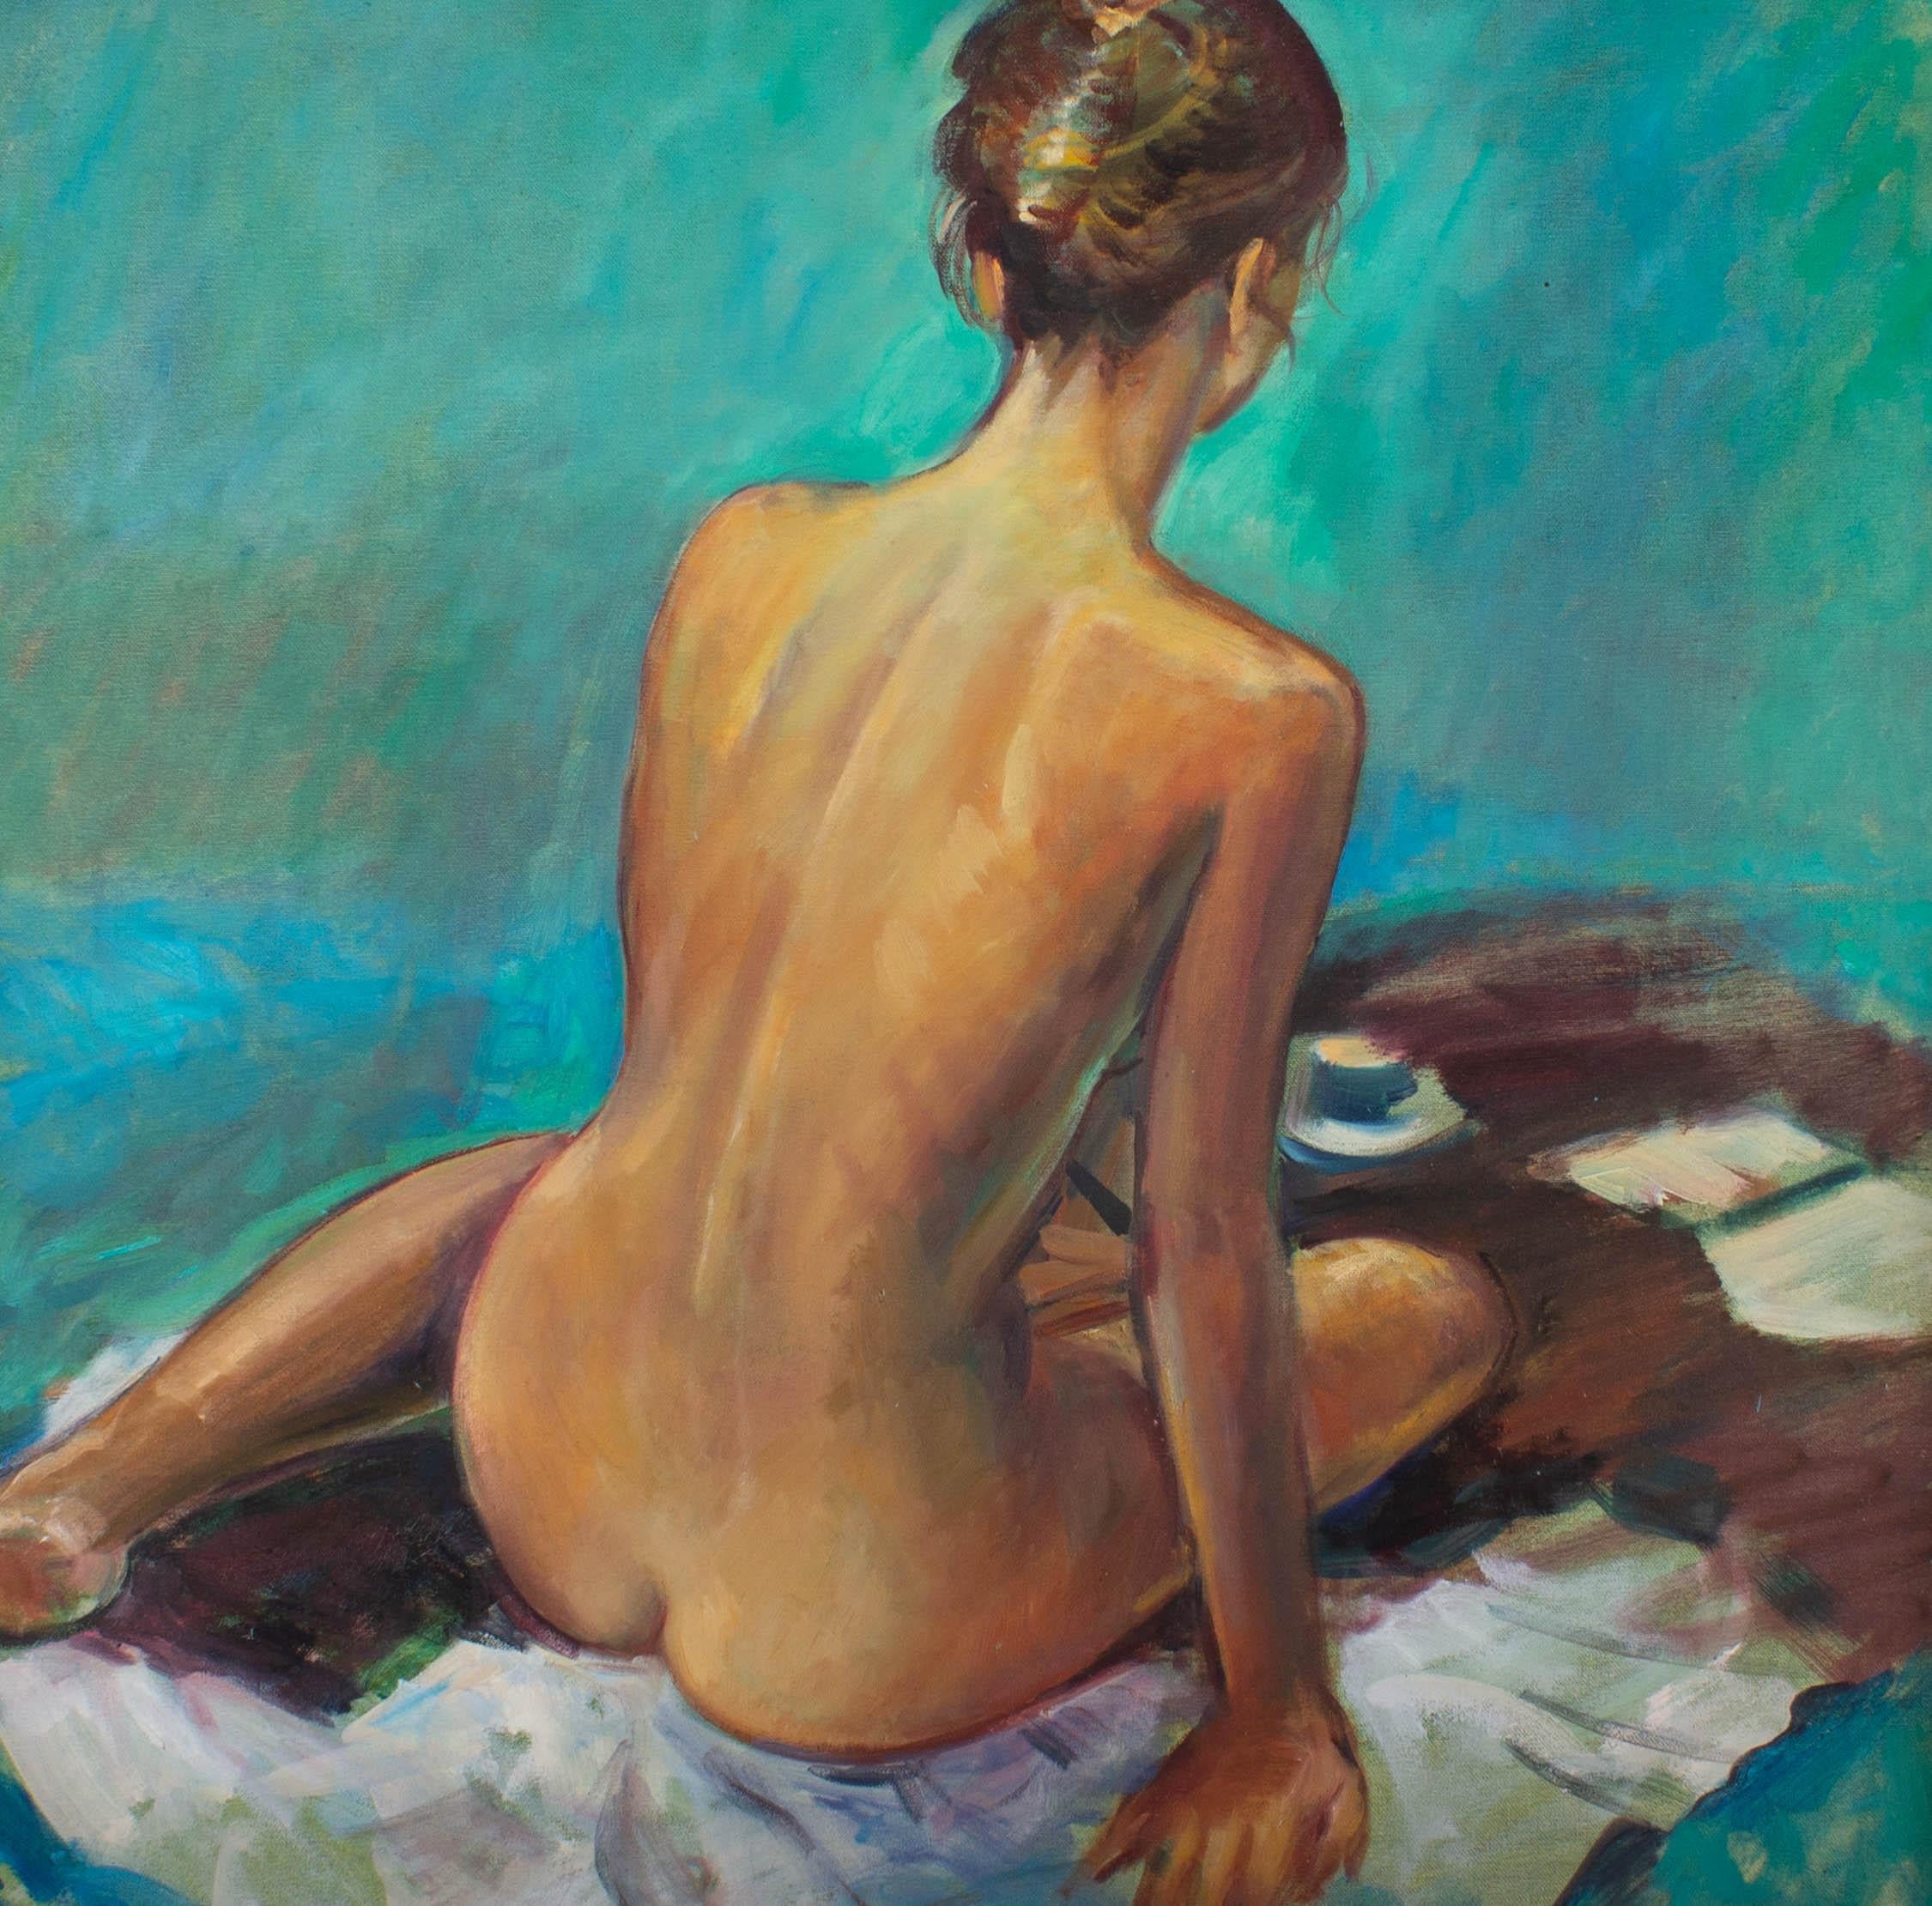 Pelling - Contemporary Oil, Seated Nude On Teal 3